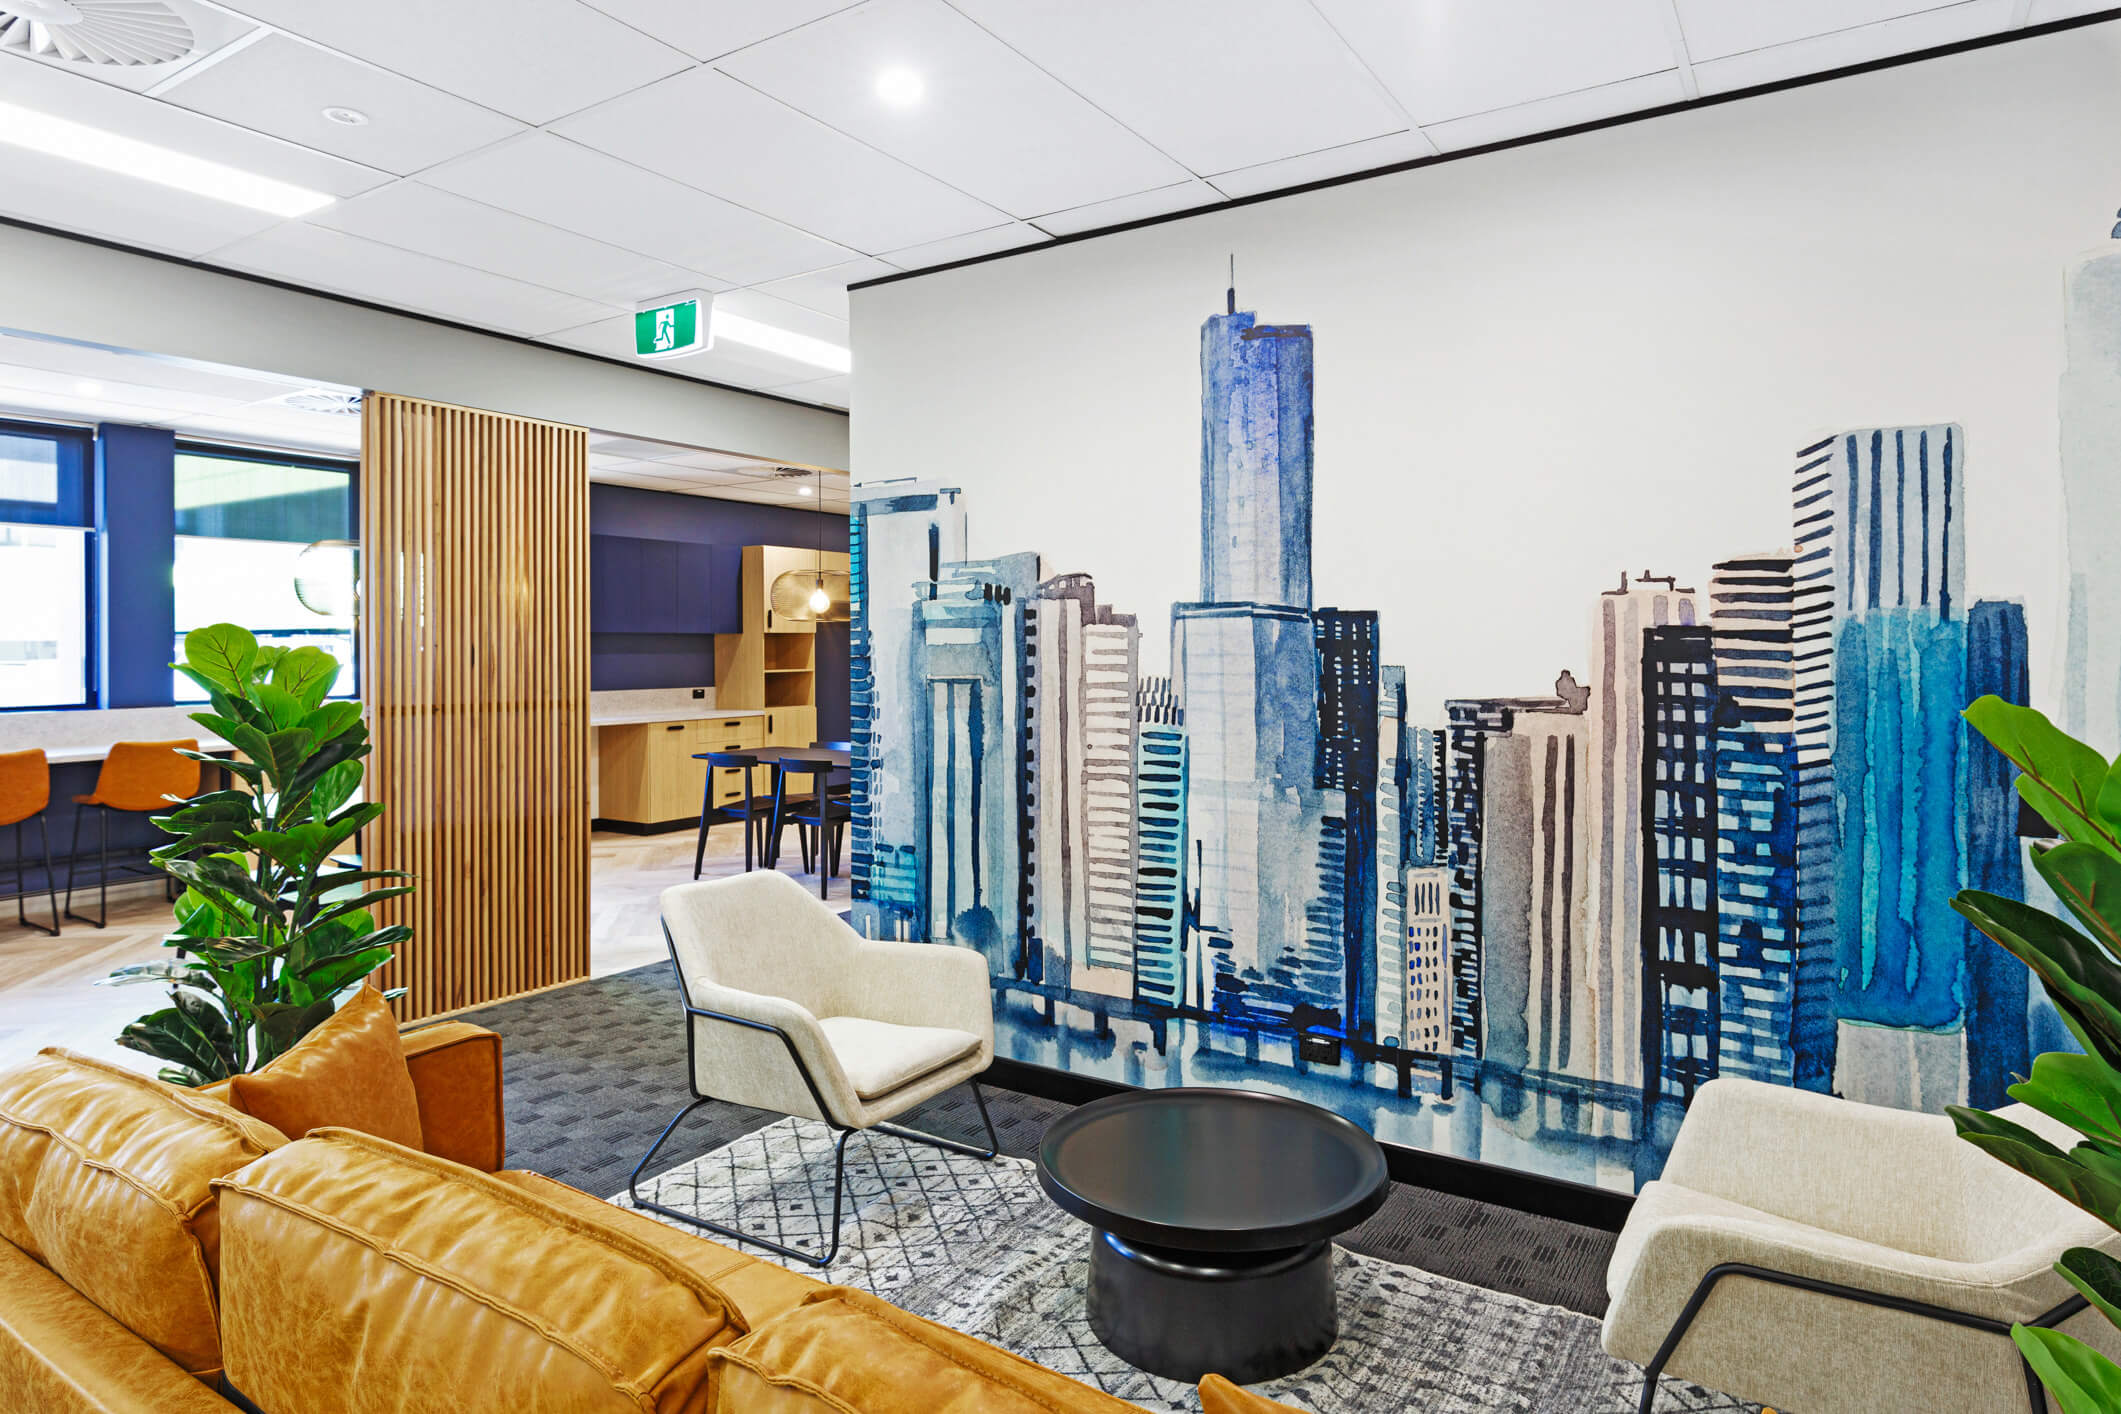 Photos of elements advisory group office fitout milton brisbane completed by Raw Commercial Projects